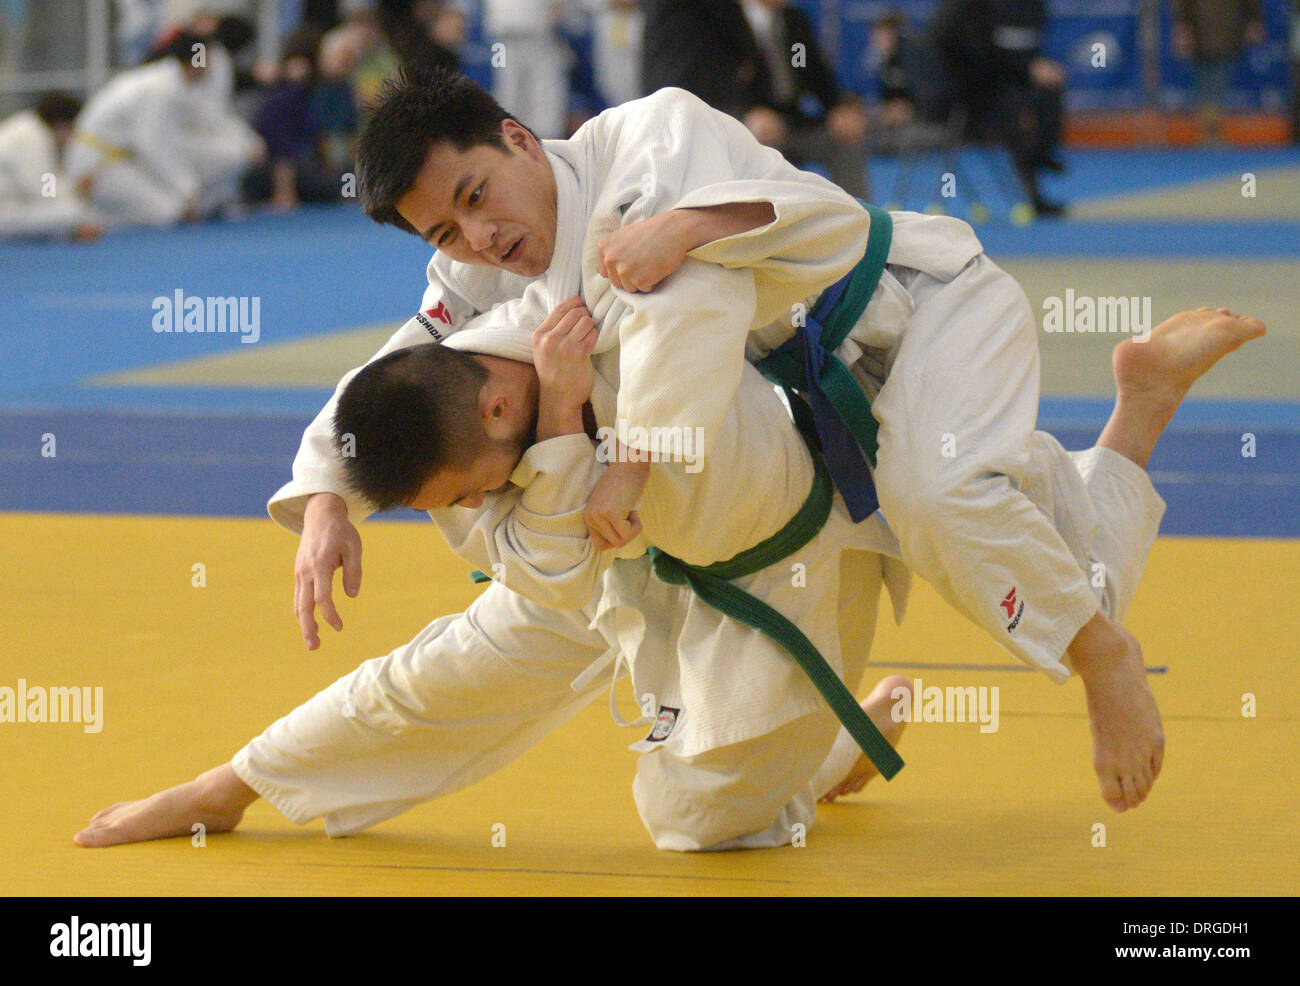 Richmond, Canada. 26th Jan, 2014. Ben Lee (R) of Canada competes with compatriot Johnny Fox Do at the 2014 Vancouver International Judo Tournament in Richmond, Canada, Jan. 25, 2014. © Sergei Bachlakov/Xinhua/Alamy Live News Stock Photo